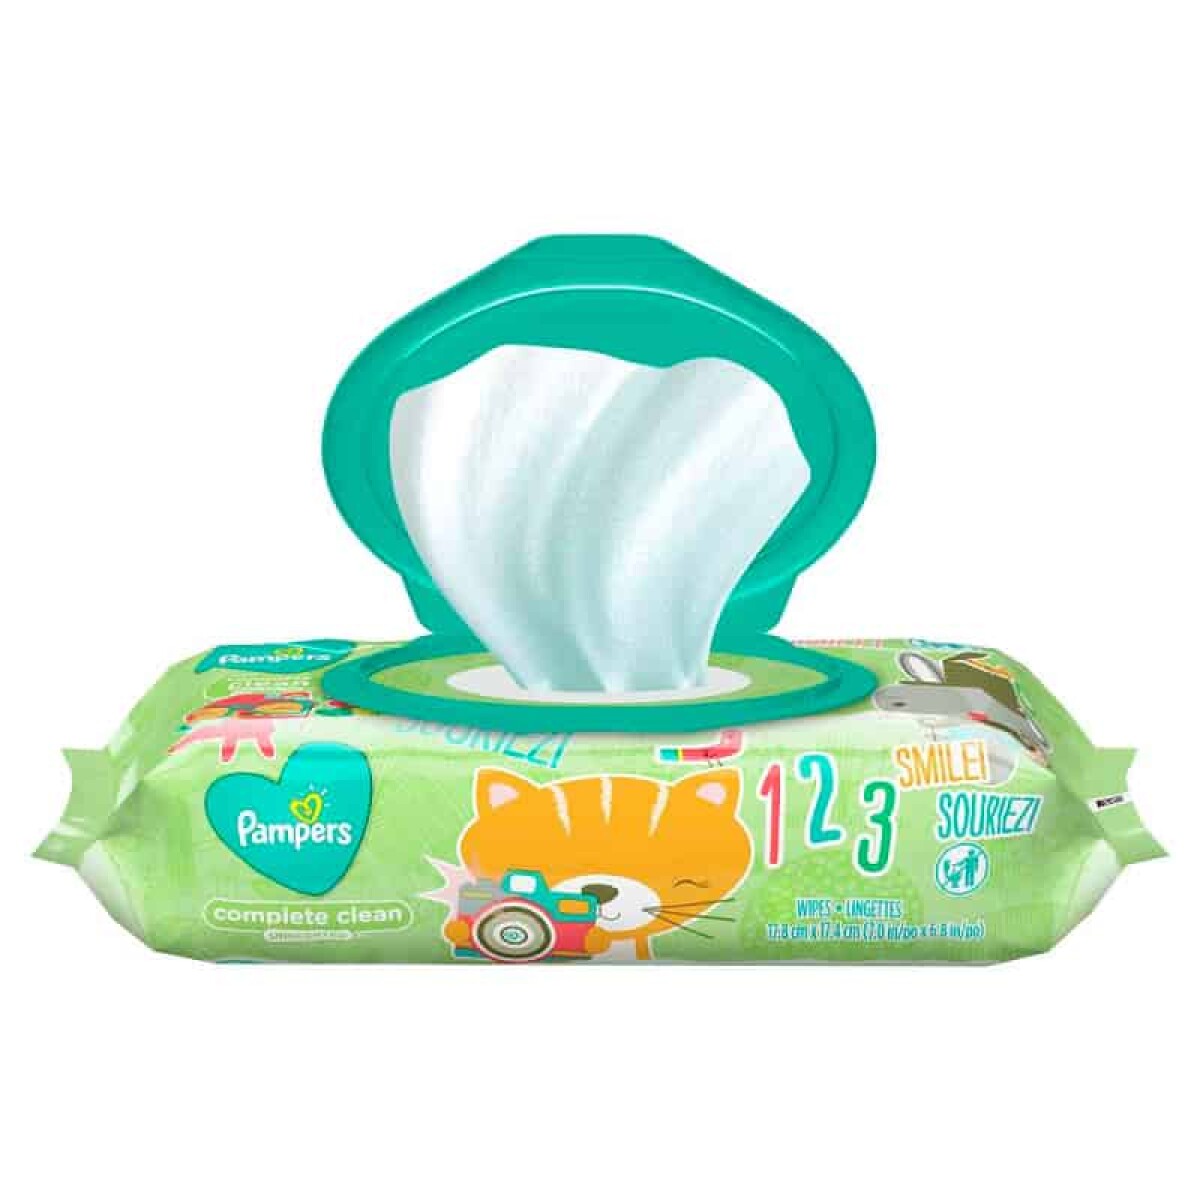 Toallitas Pampers Complete Clean Sin Fragancia X 44 